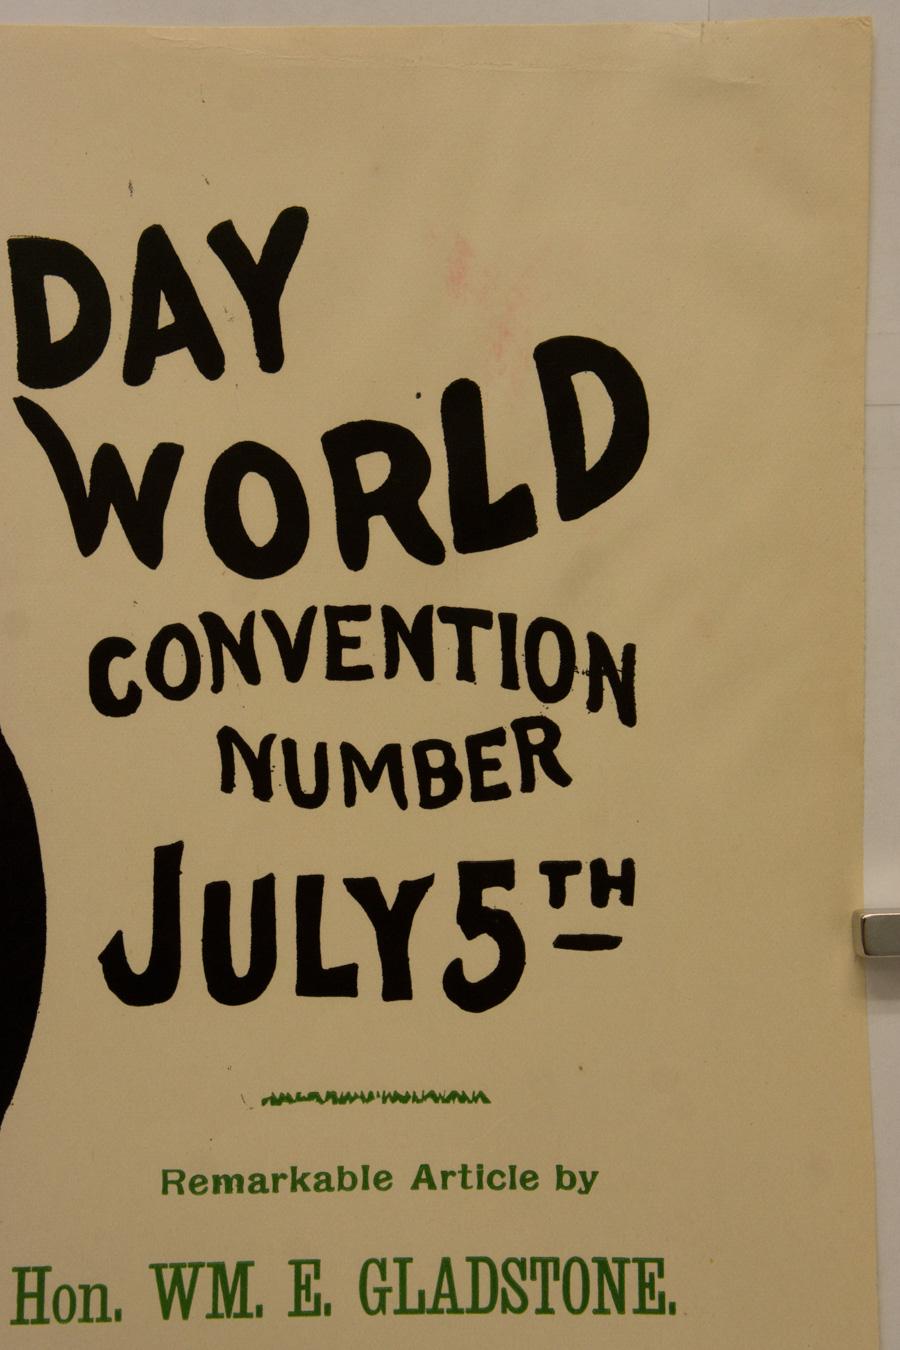 The Sunday World; The Great Sunday World Convention Number, July 5th - Print by F. Gilbert Edge